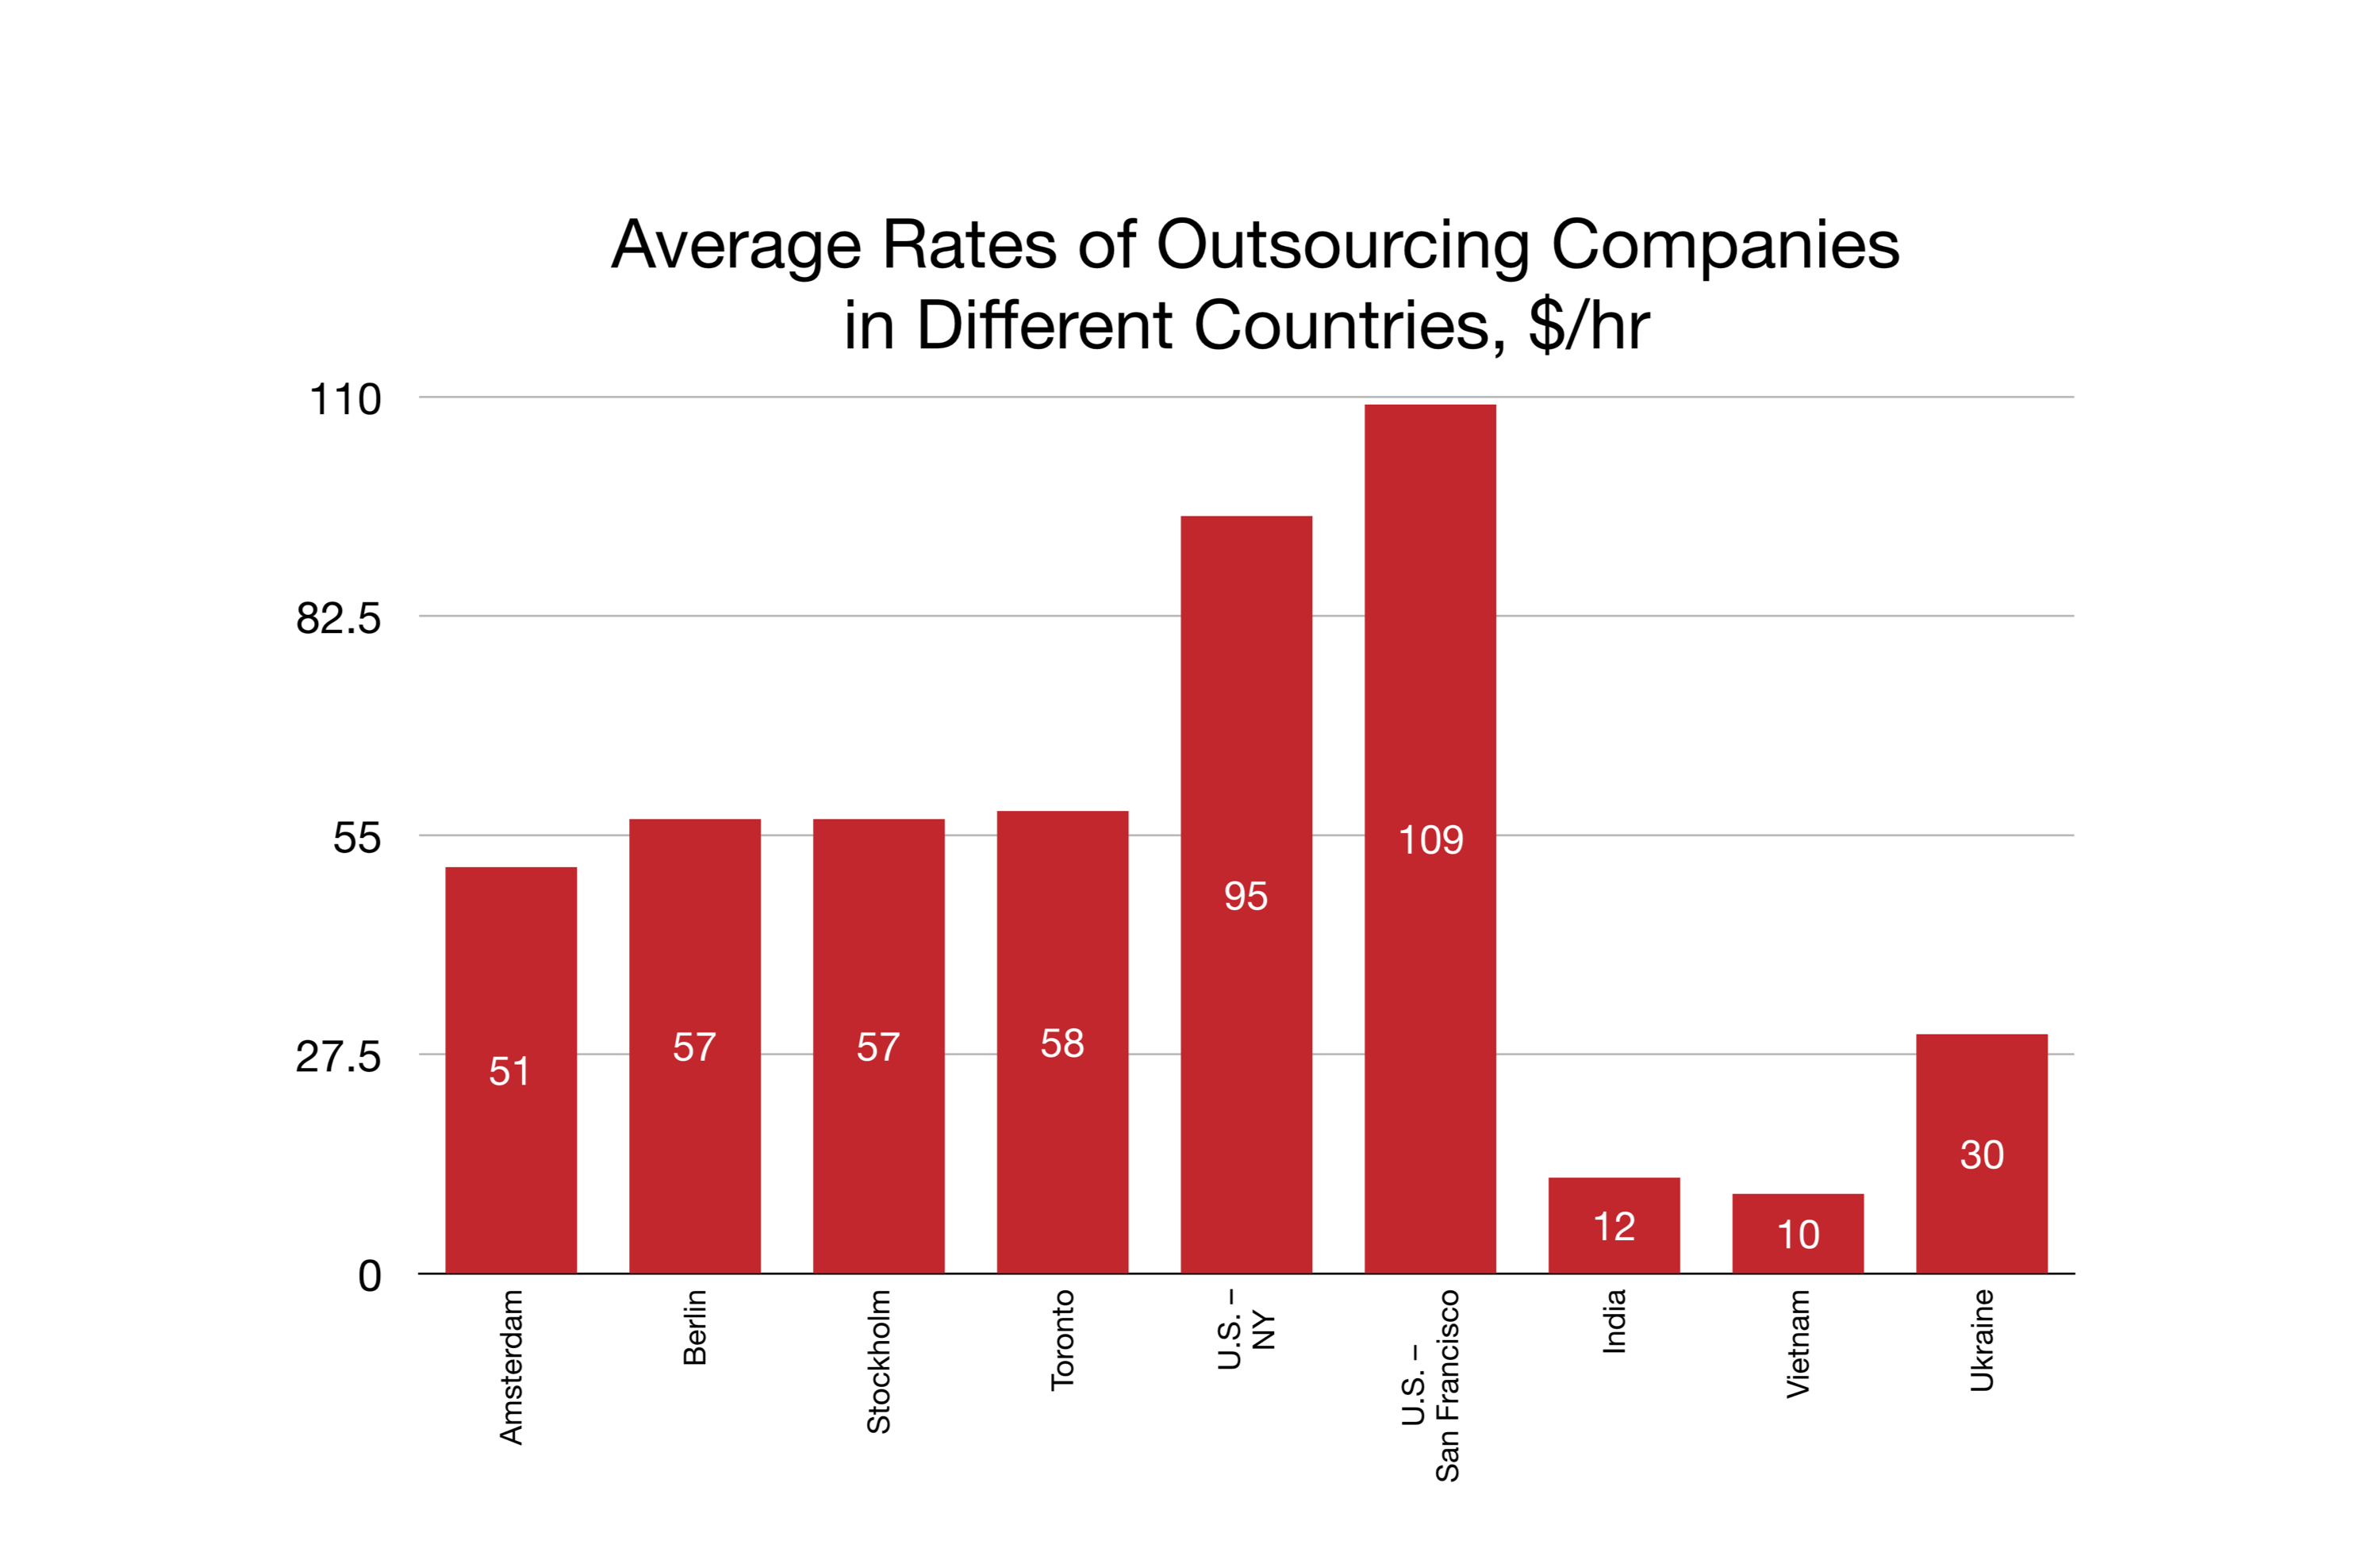 Average Rates of Outsourcing Companies in Different Countries, $/hr